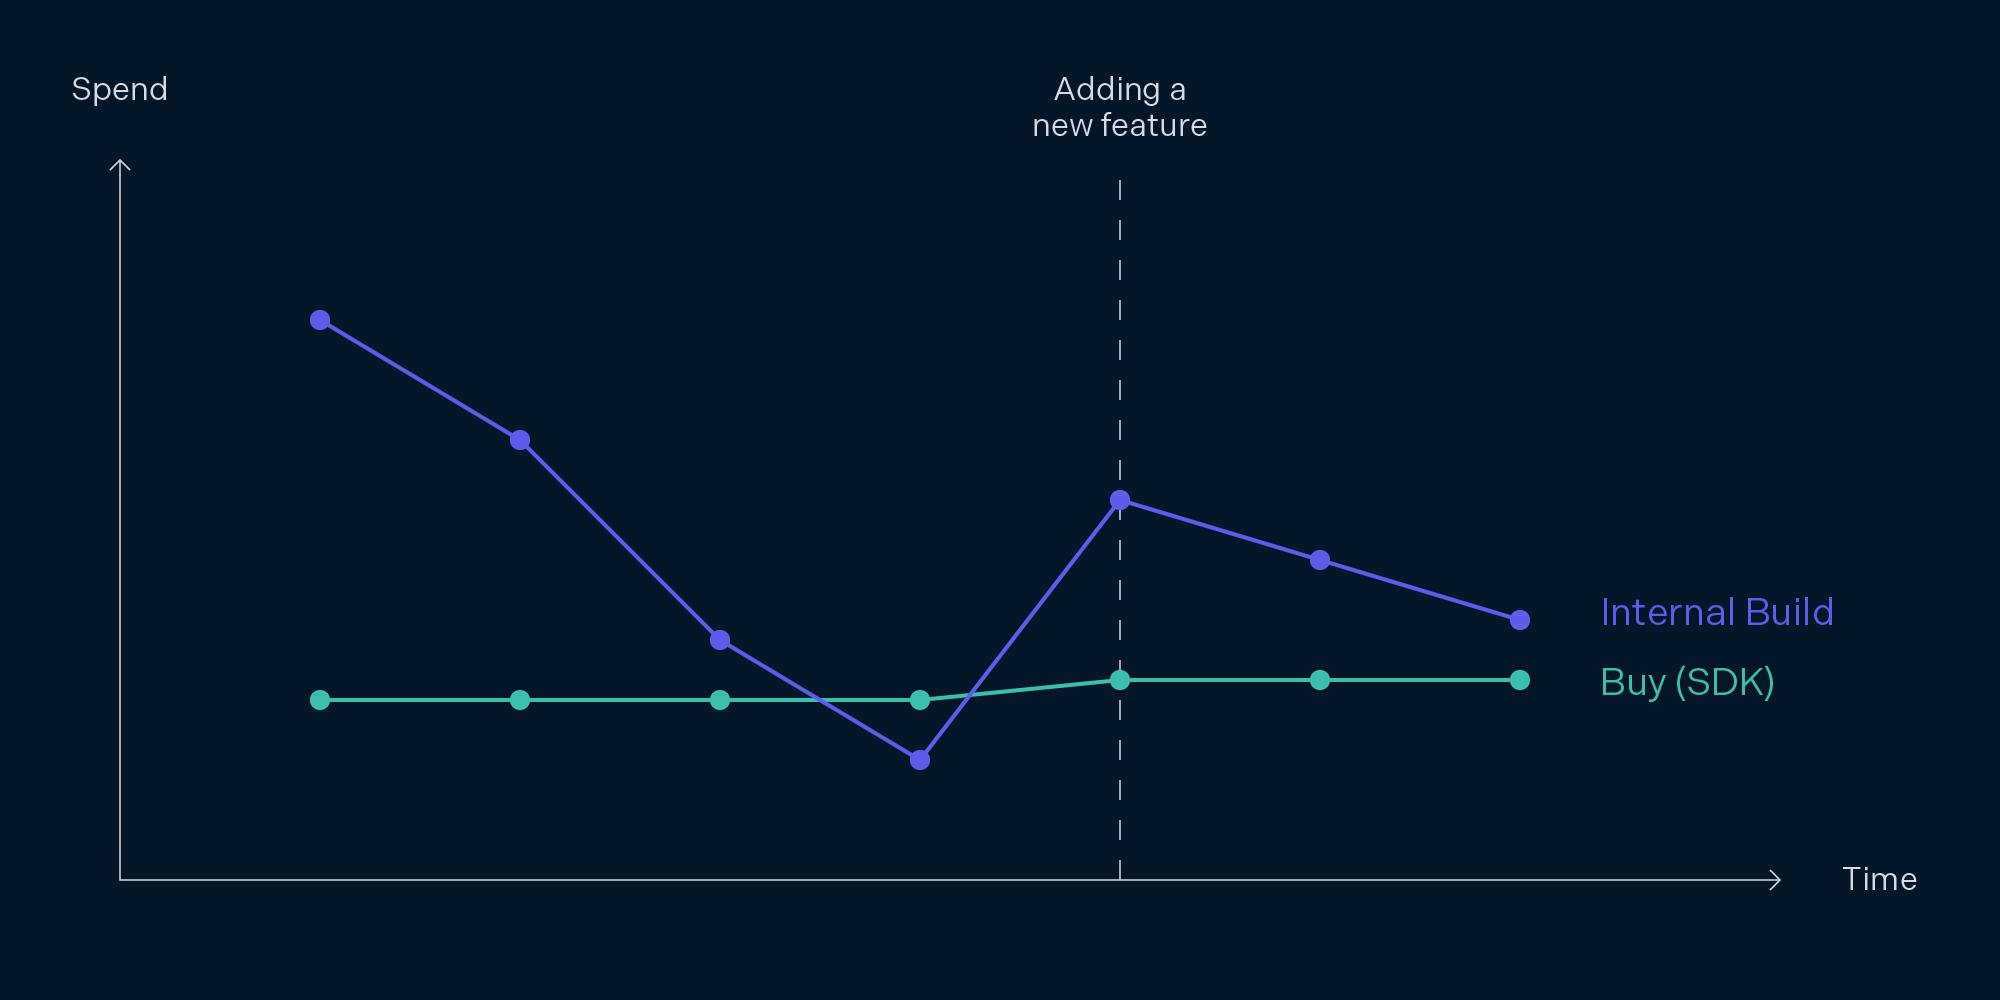 Line graph showing build cost vs. buy cost over time when adding new features